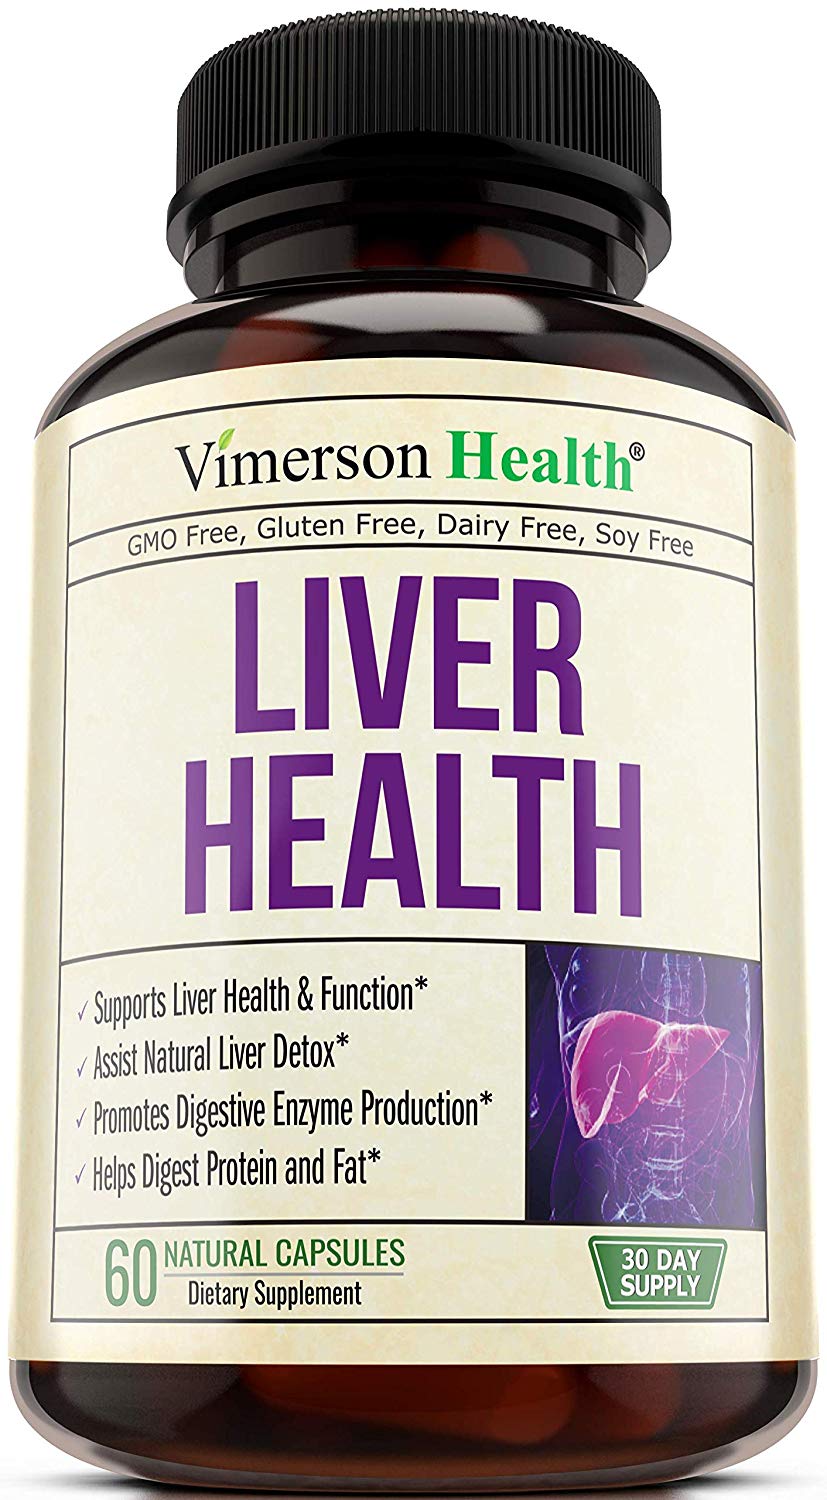 Review of Liver Health Detox Support Supplement. Natural Herbal Blend by Vimerson Health